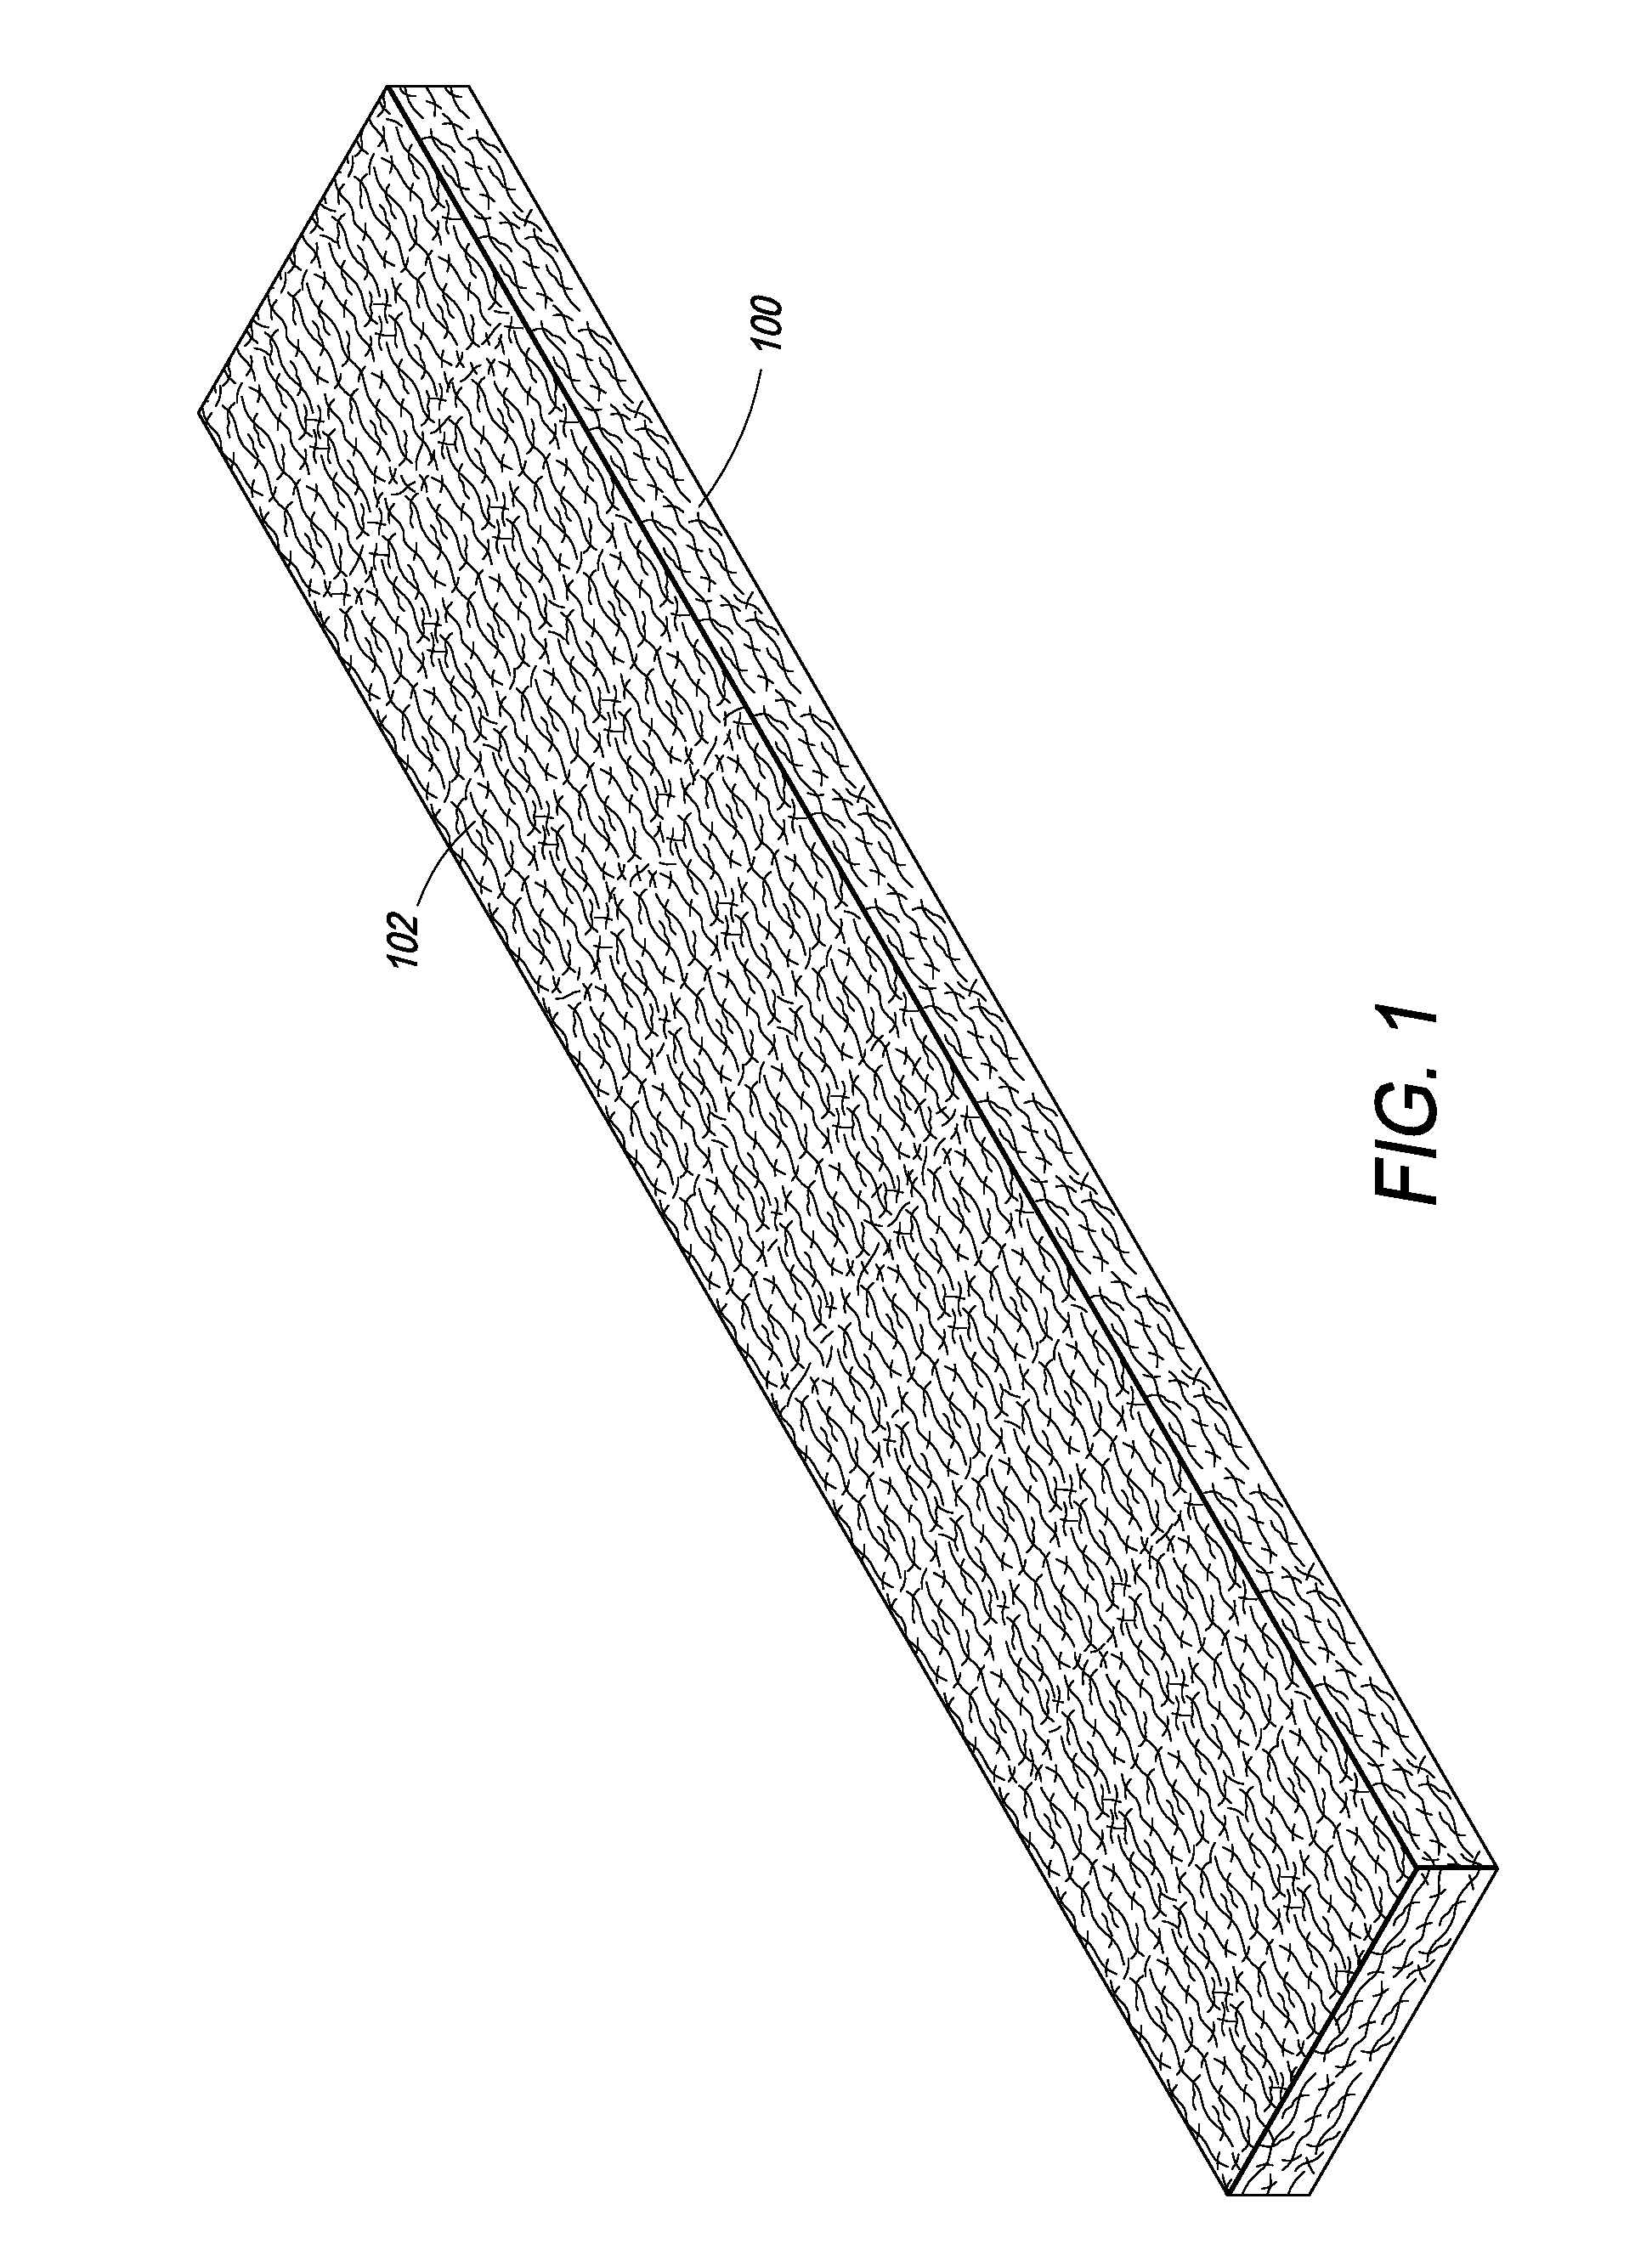 Device and method for purifying water